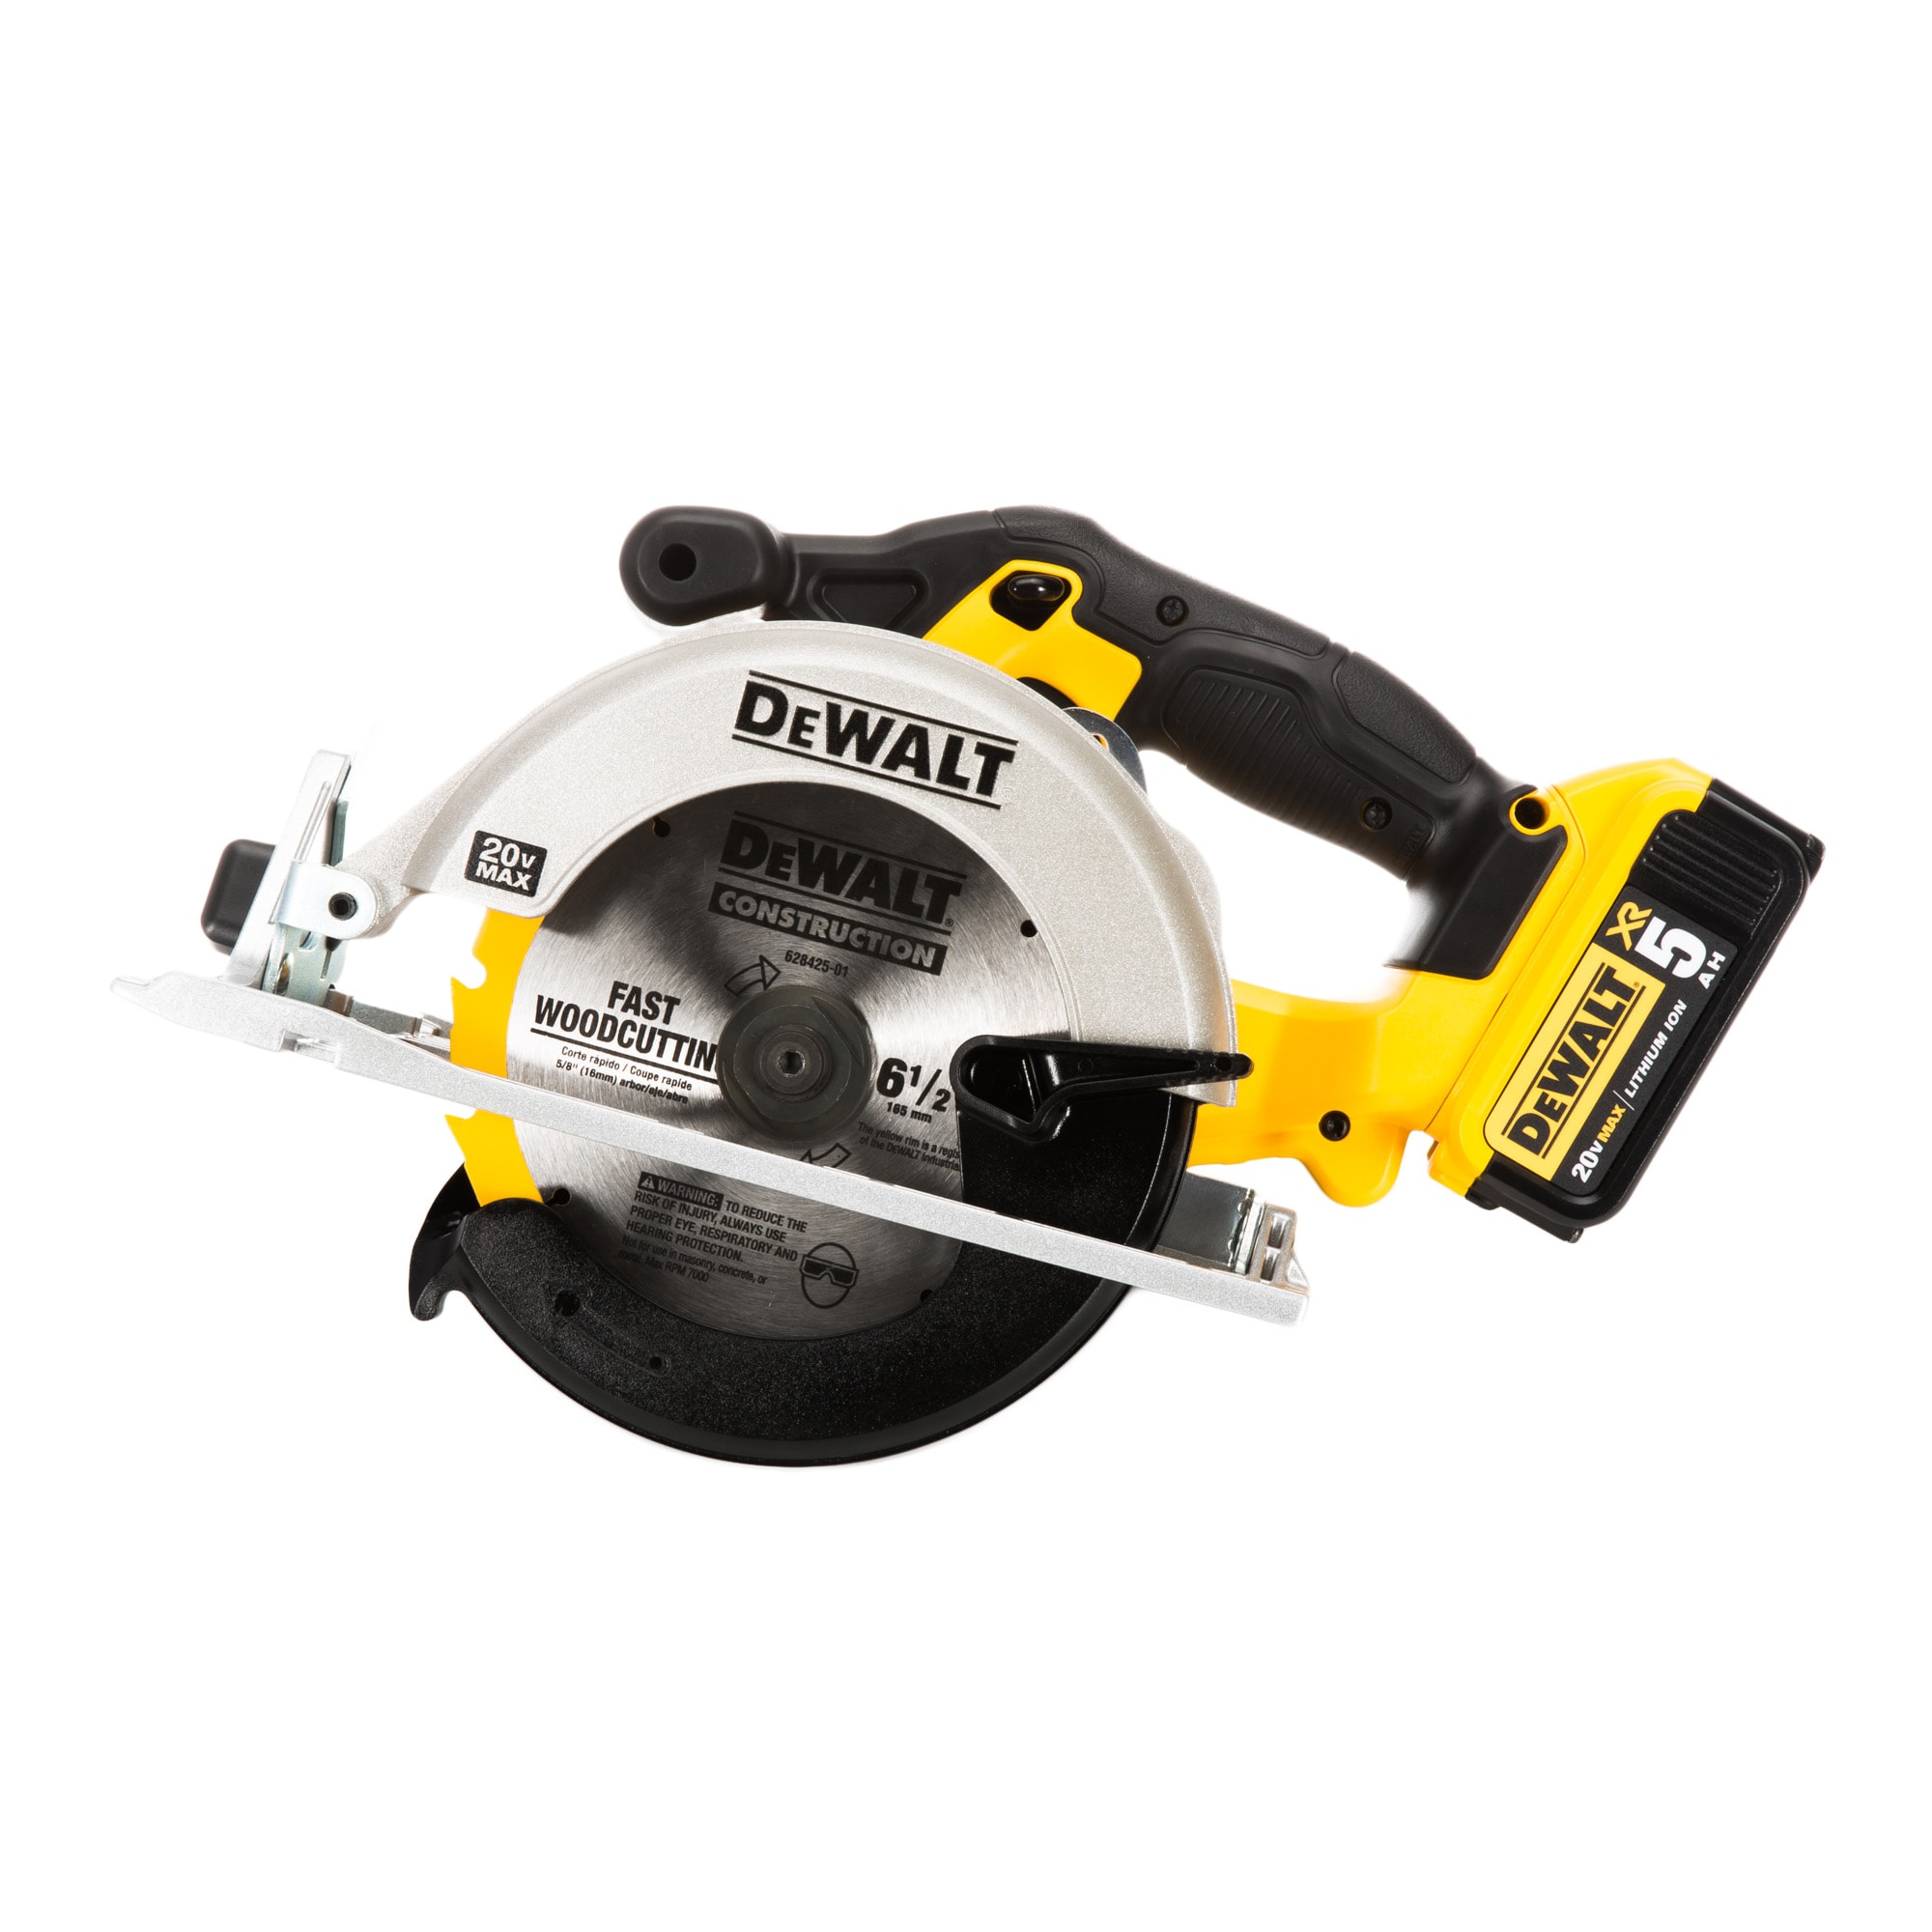  DEWALT 20V MAX Circular Saw, 6-1/2-Inch Blade, 460 MWO Engine,  0-50 Degree Bevel Capability, Bare Tool Only (DCS391B) : Everything Else